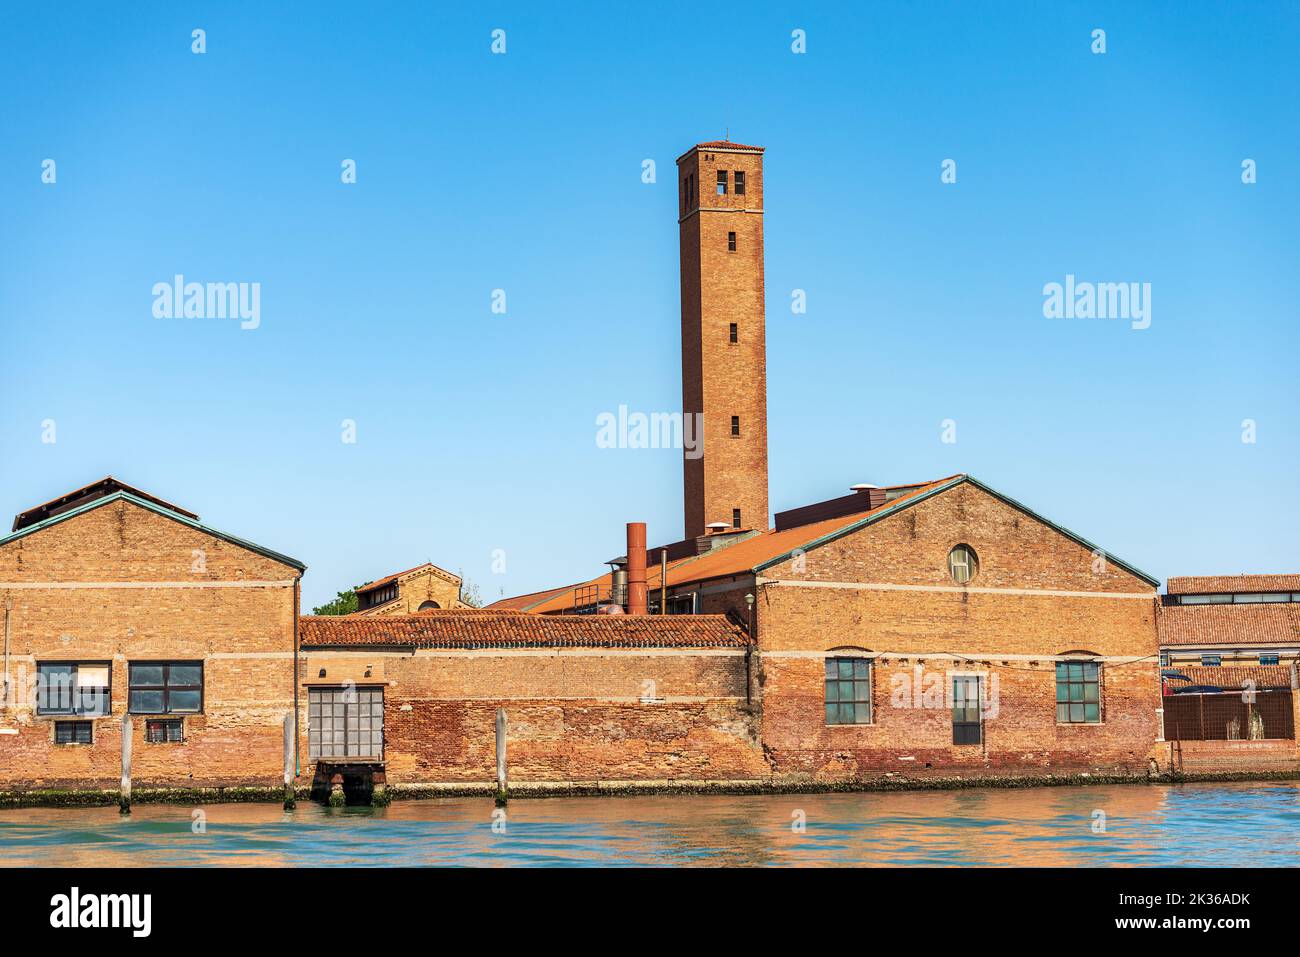 Ancient glass factories of Murano island, famous for the production of artistic glass. Venetian lagoon, Venice, Veneto, Italy, Europe. Stock Photo